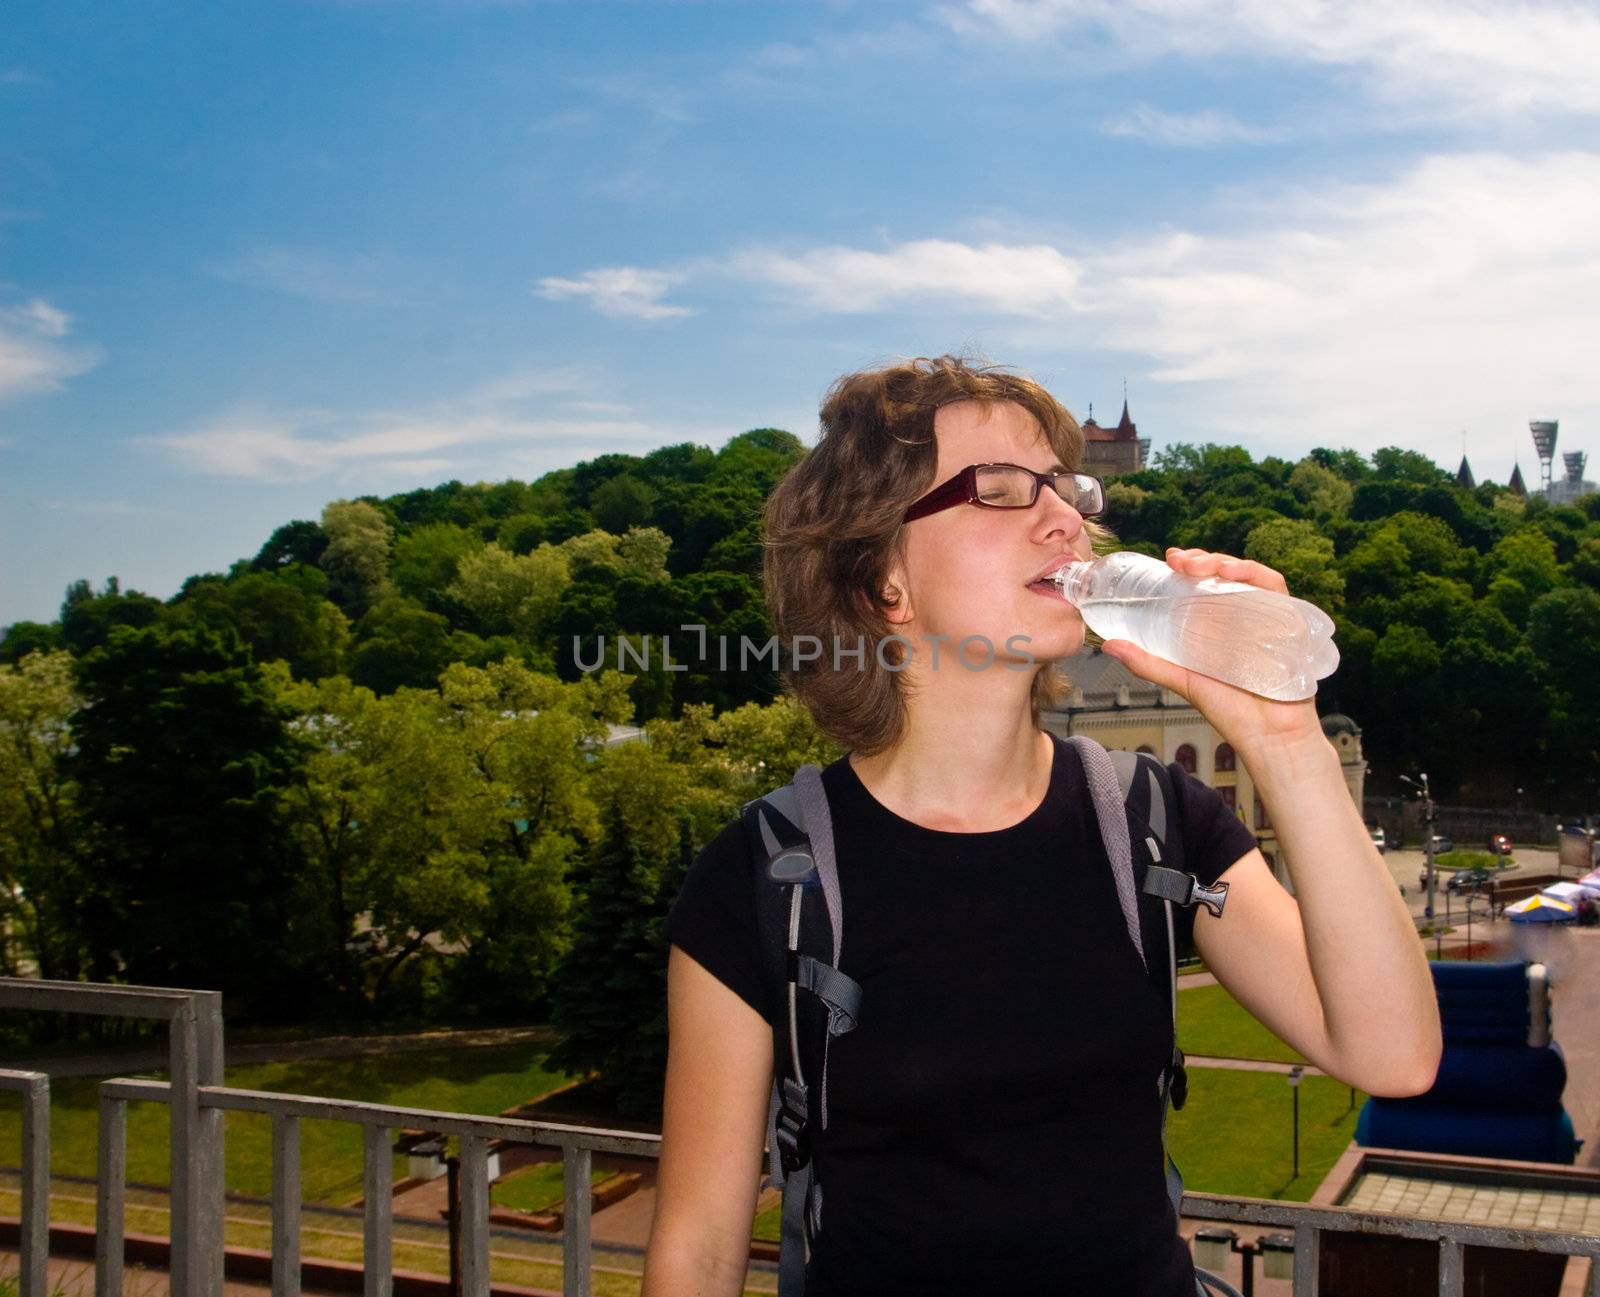 Young woman walking in the city and refreshing herself with cold fresh water